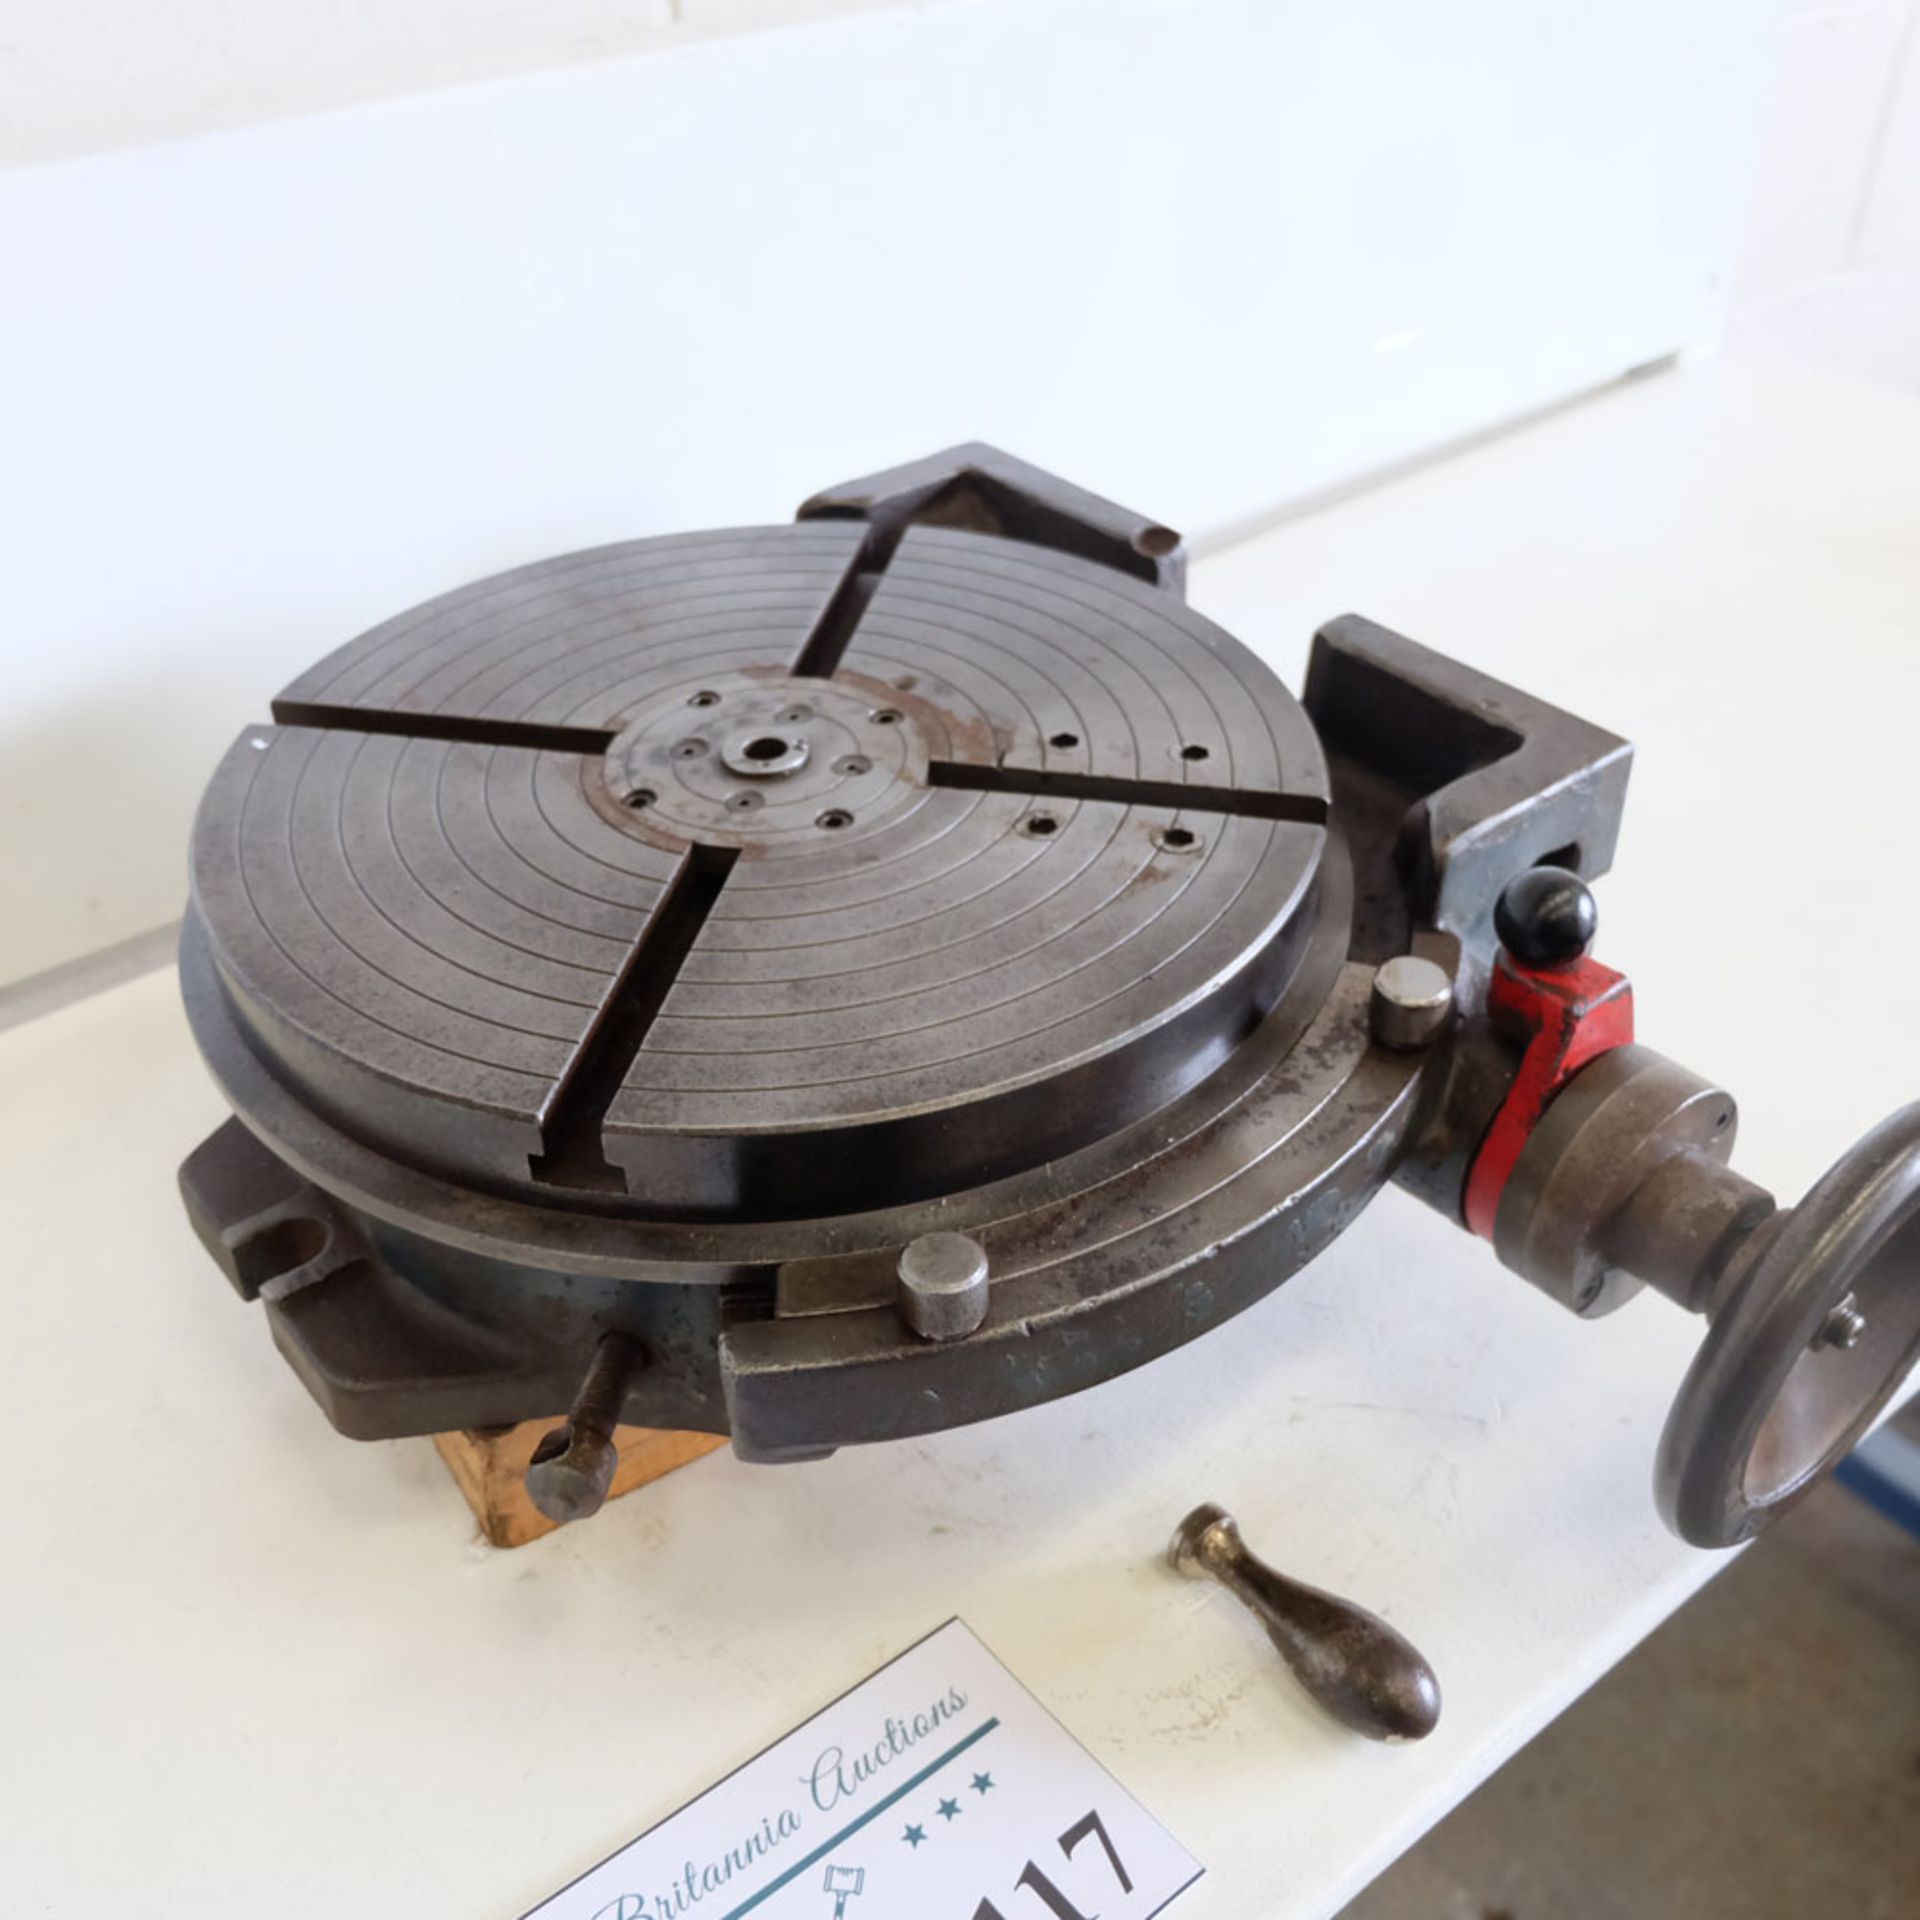 12" Rotary Table. - Image 3 of 5